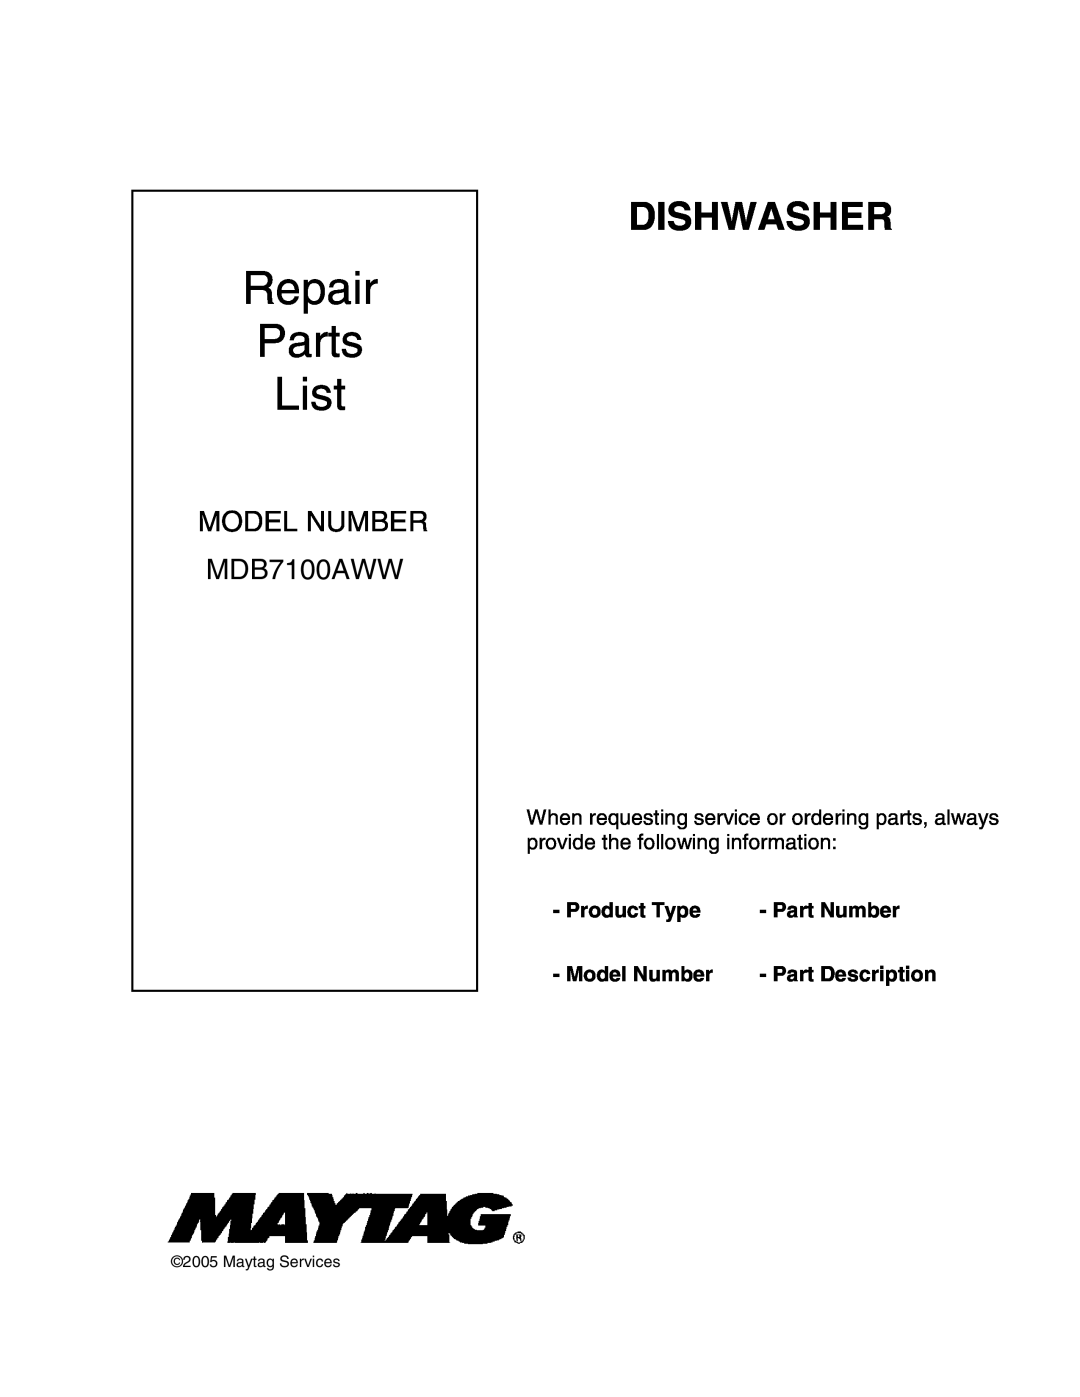 Maytag MDB7100AWW manual Product Type, Part Number, Model Number, Part Description, Repair Parts List, Dishwasher 